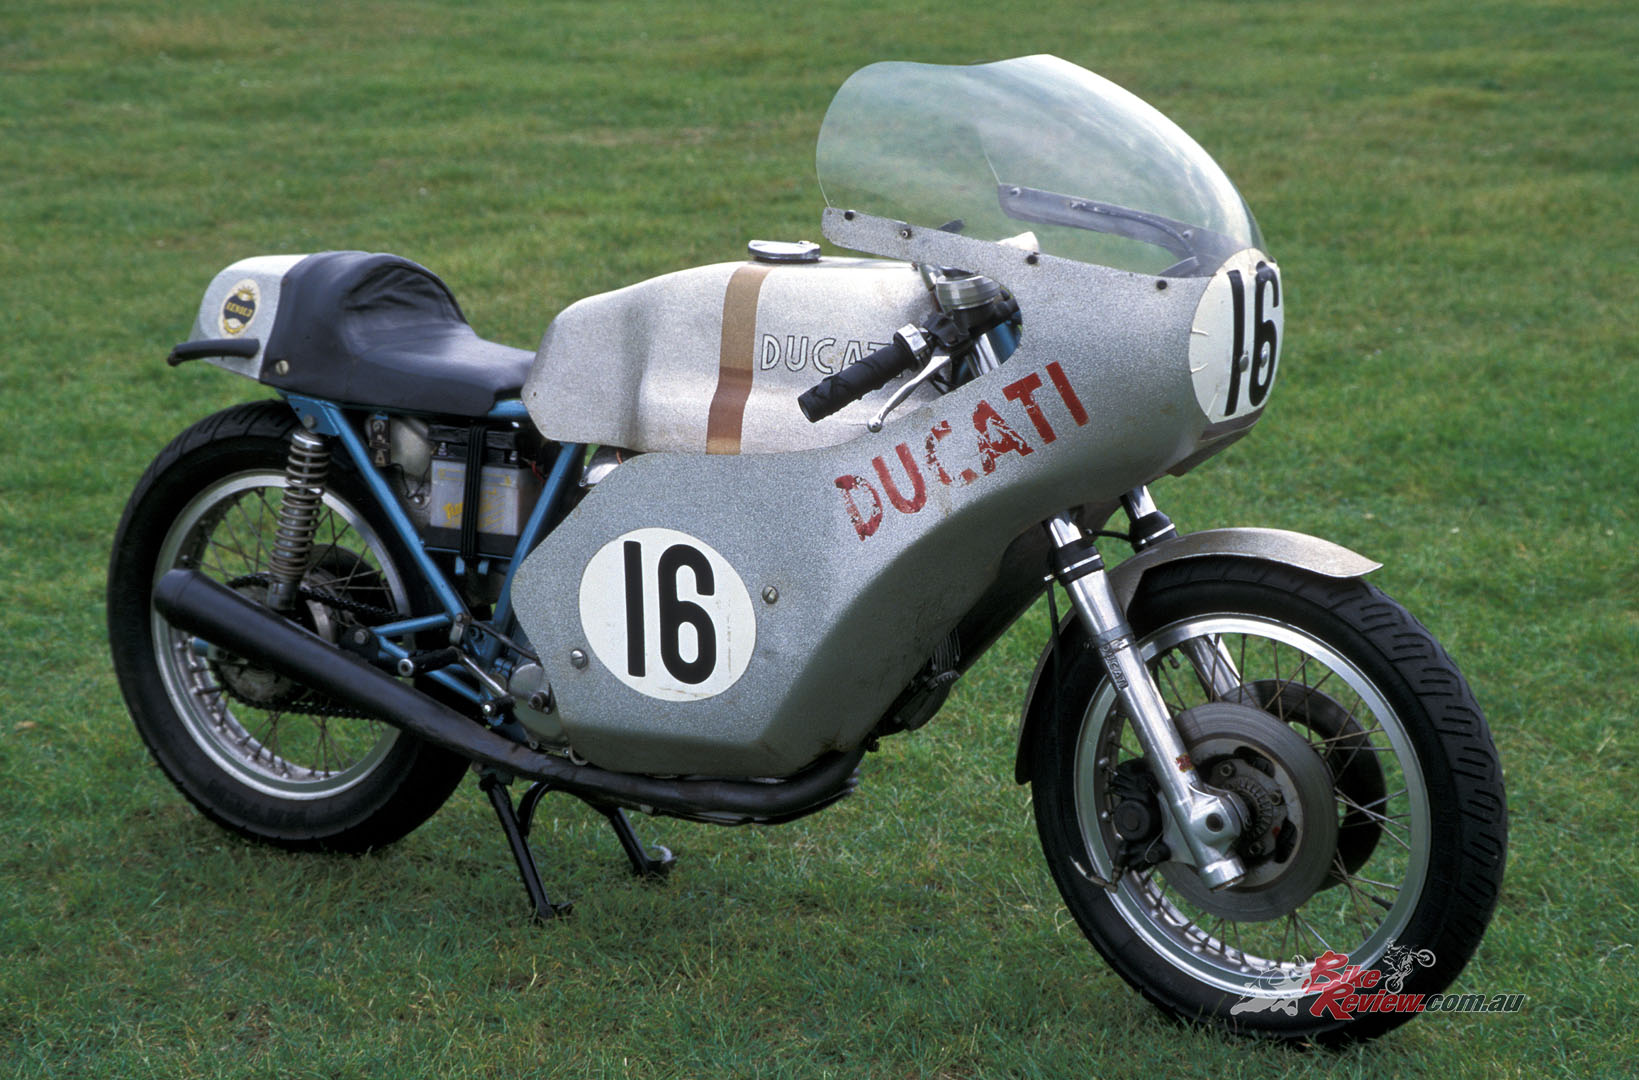 Ducati's long, v-twin machine was turned down by big names due it being uncompetitive on paper compared to the two-stroke, Japanese machines of the era.